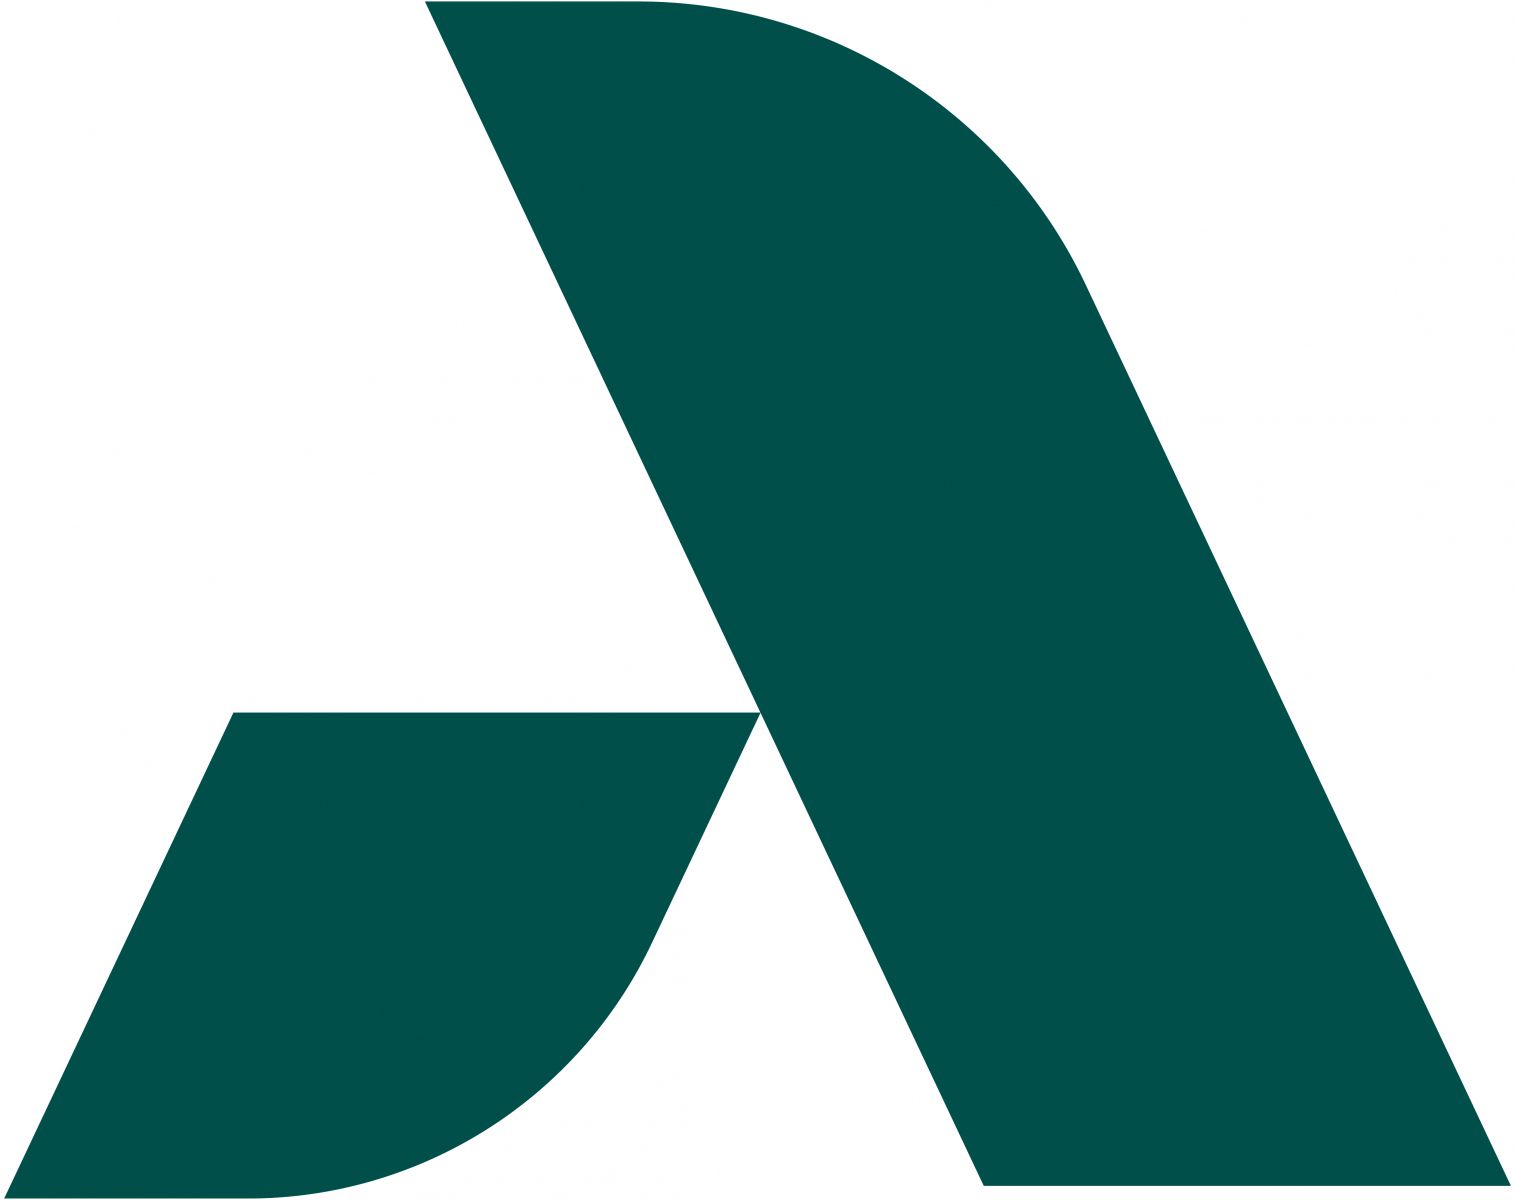 You could say An uppercase abstract A in Heritage Green composed of a smaller leg representing Augusta Technical College supporting the larger leg representing the Augusta Community and economy.